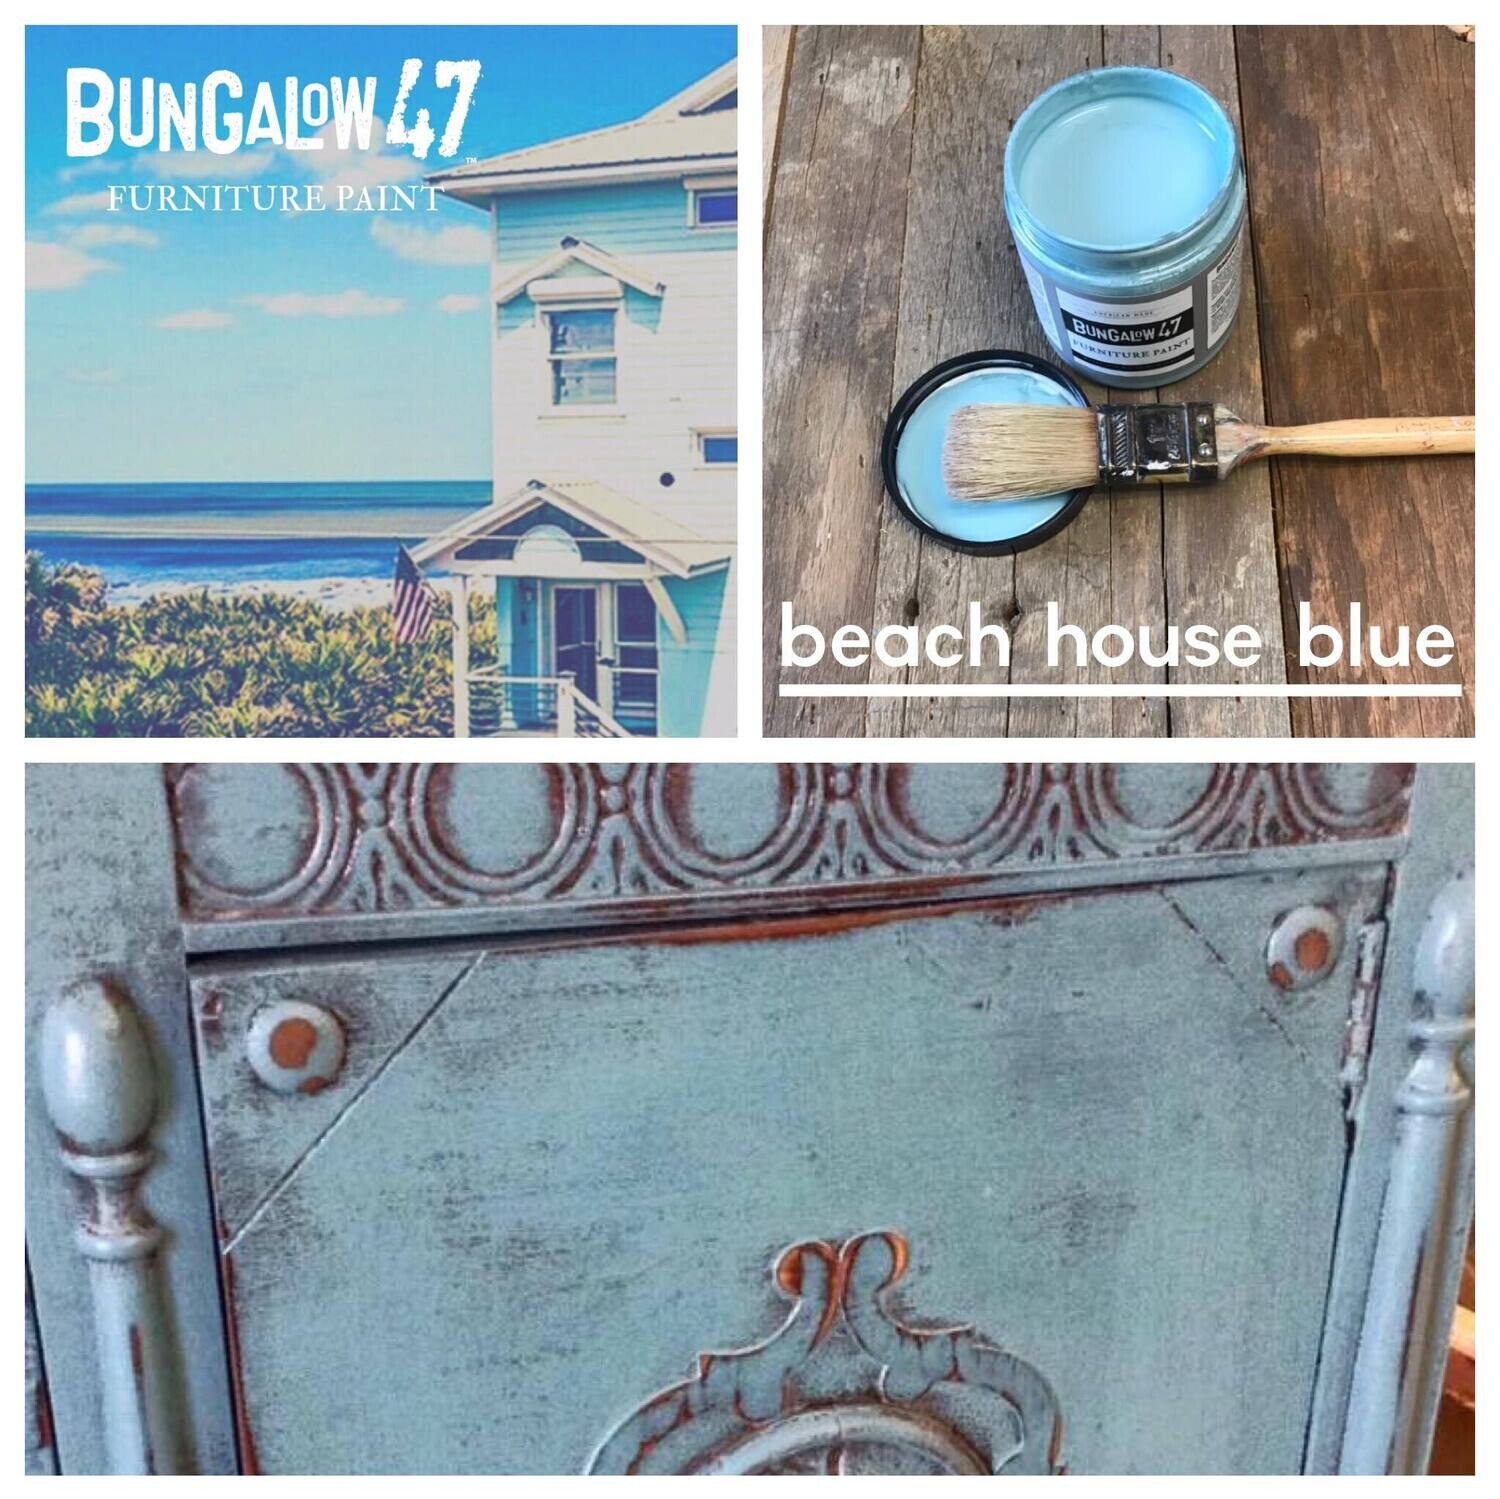 Beach House Blue Furniture Paint by Bungalow 47